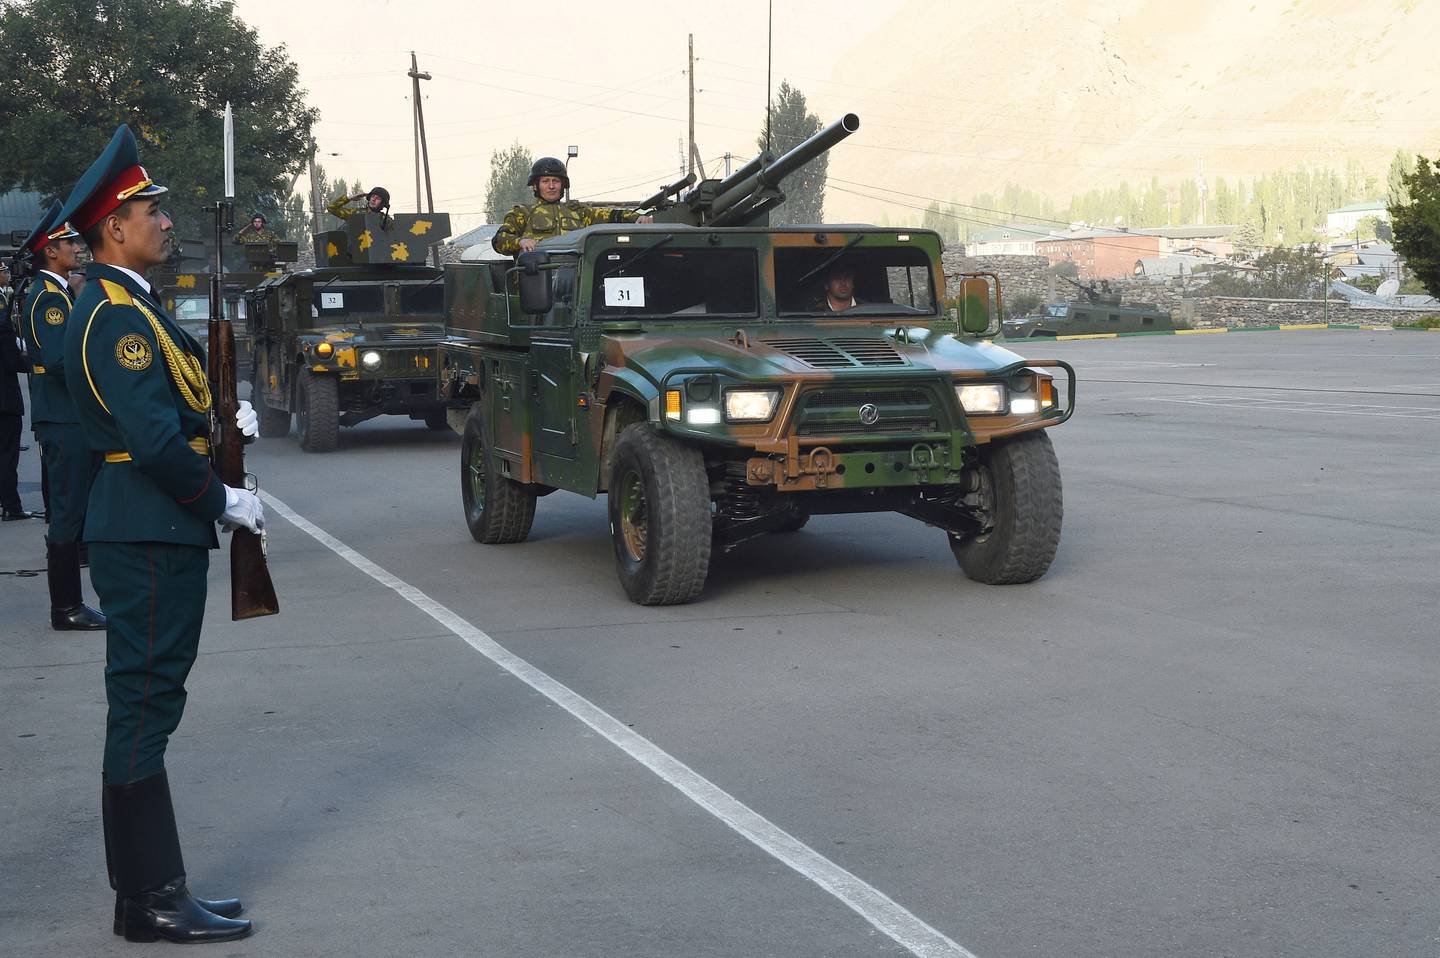 Tajik service members take part in a military parade near the border with Afghanistan in the town of Khorog. Reuters